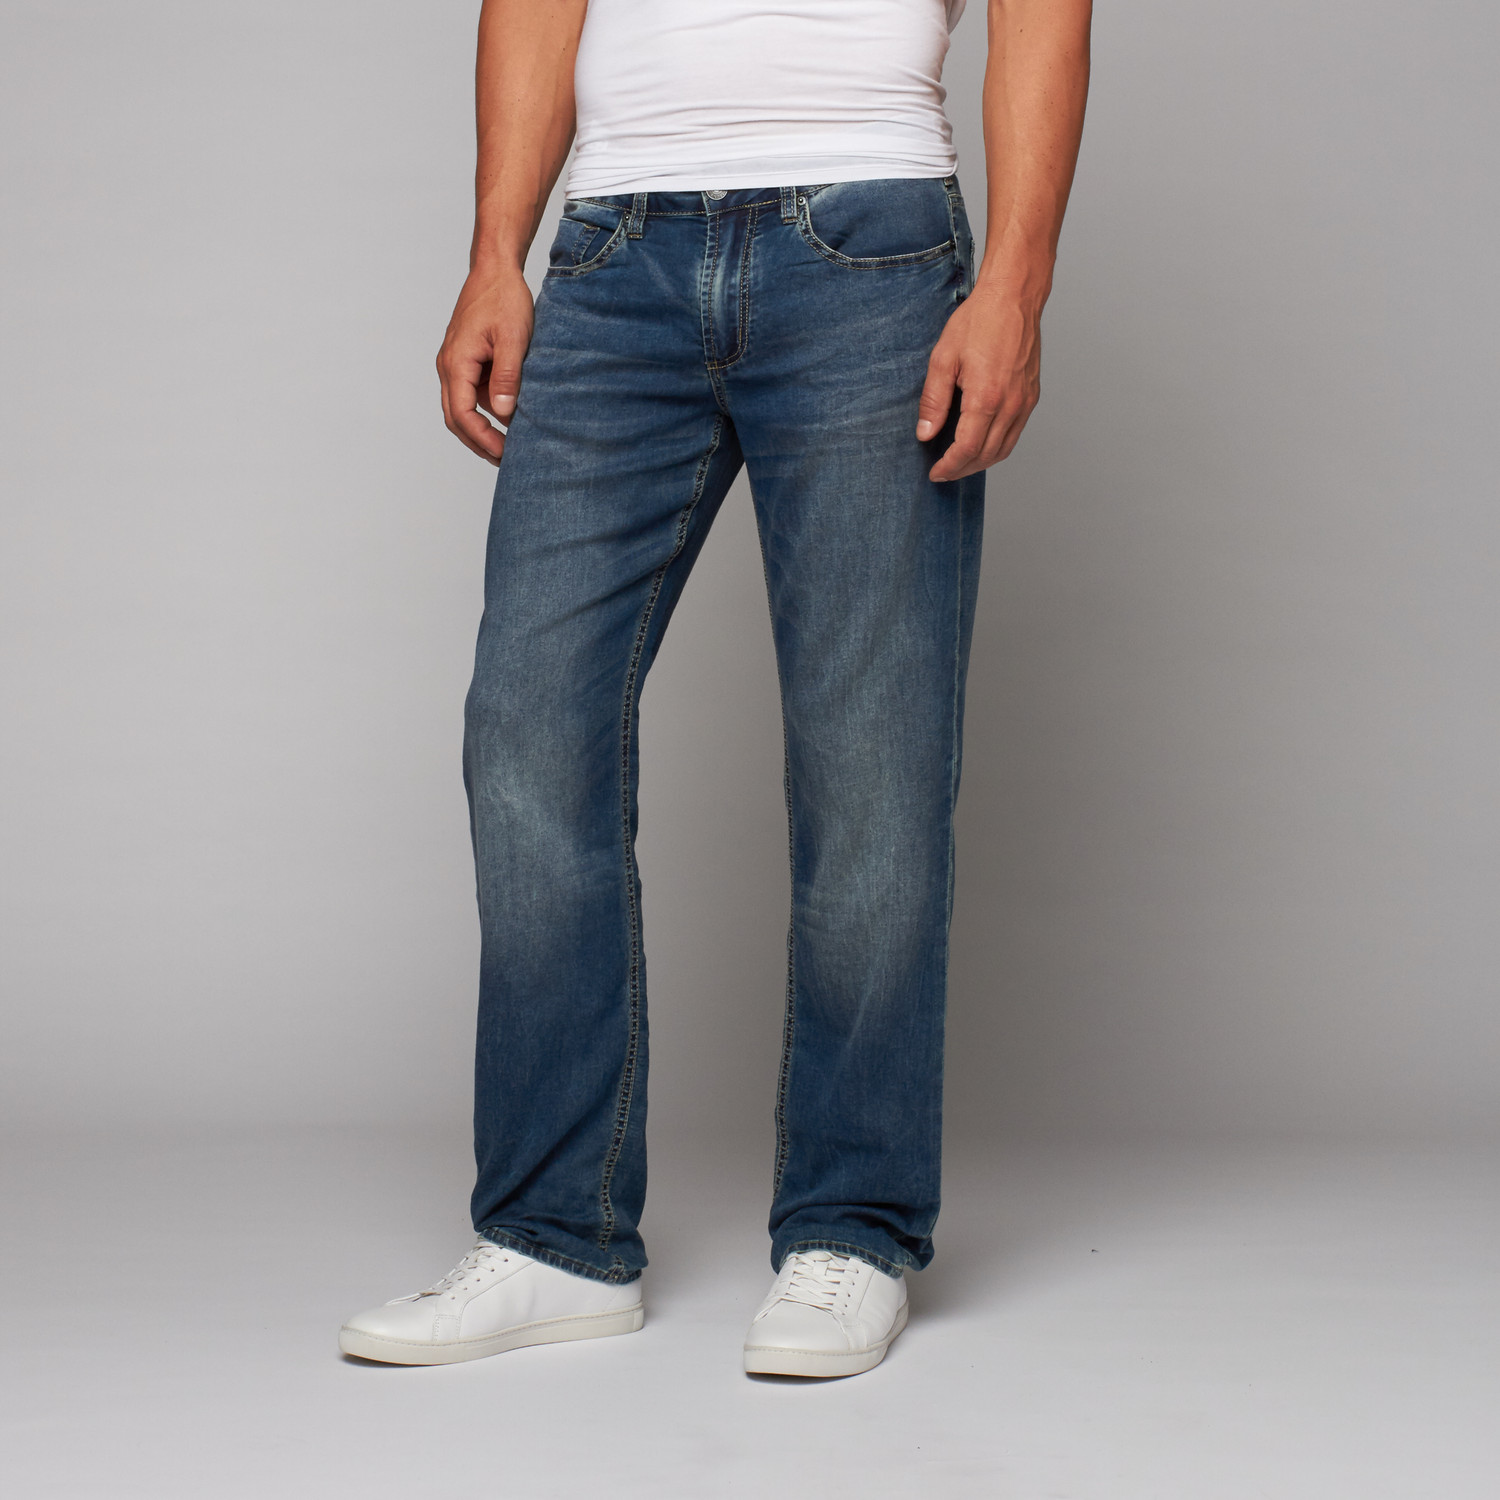 Fred-X Jean // Indigo (31WX30L) - Buffalo Jeans - Touch of Modern